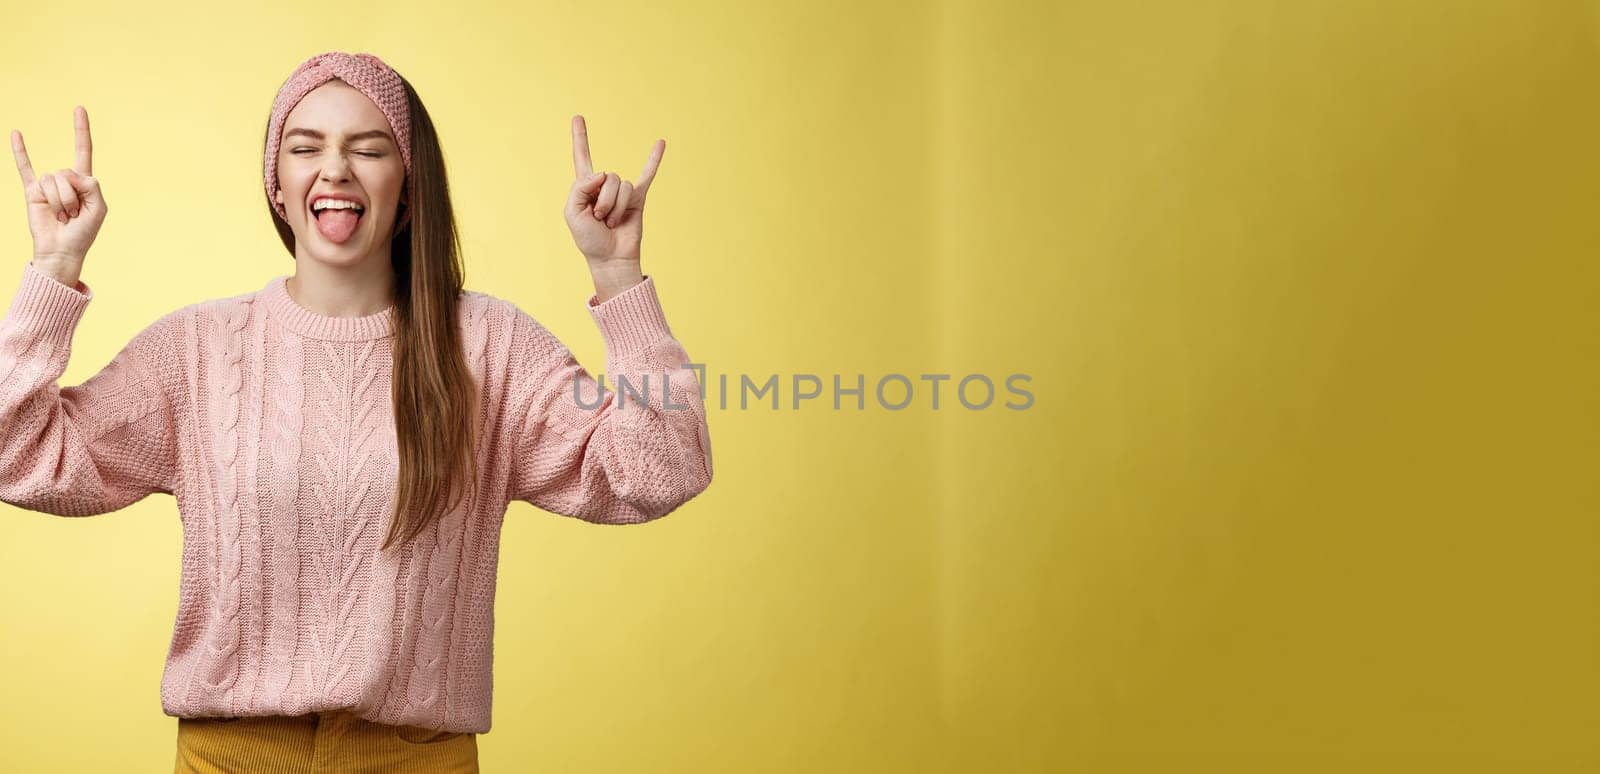 Lifestyle. Cute heavy metal lover showing rock roll symbol sticking tongue amused and happy fooling around listening favourite music posing excited and pleased against yellow background in knitted outfit.